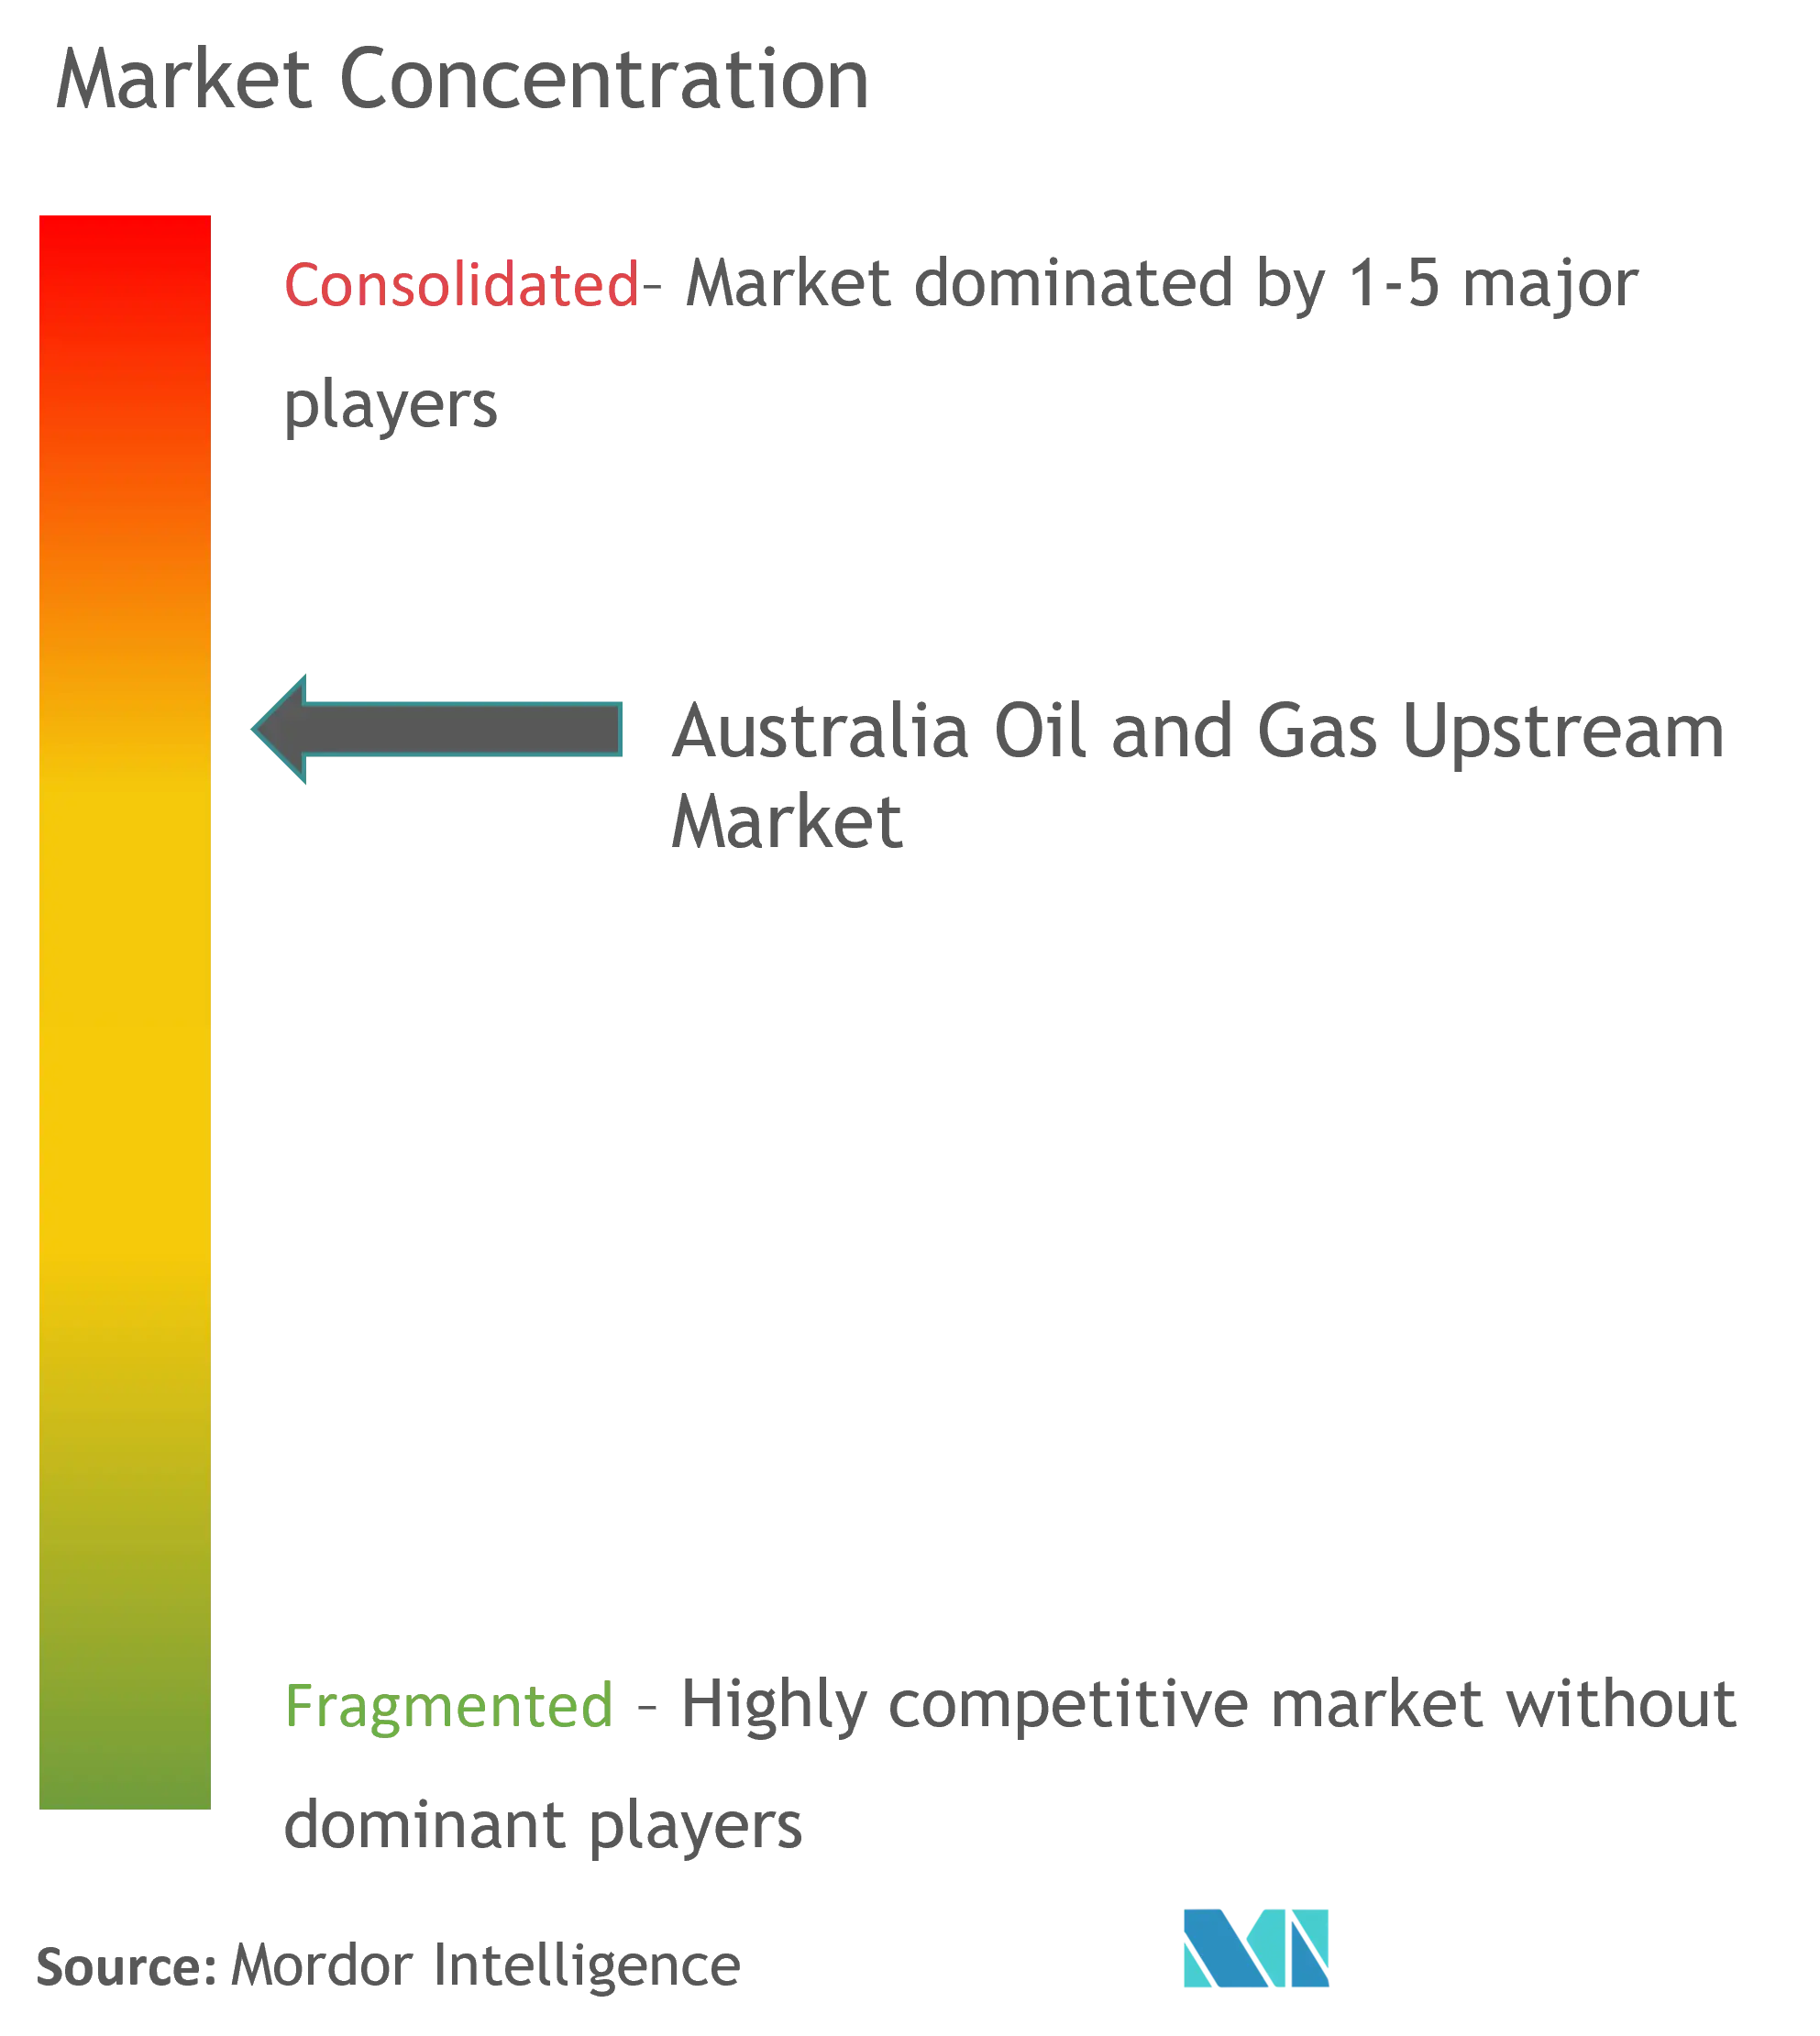 Market Concentration-Australia Oil and Gas Upstream Market.png